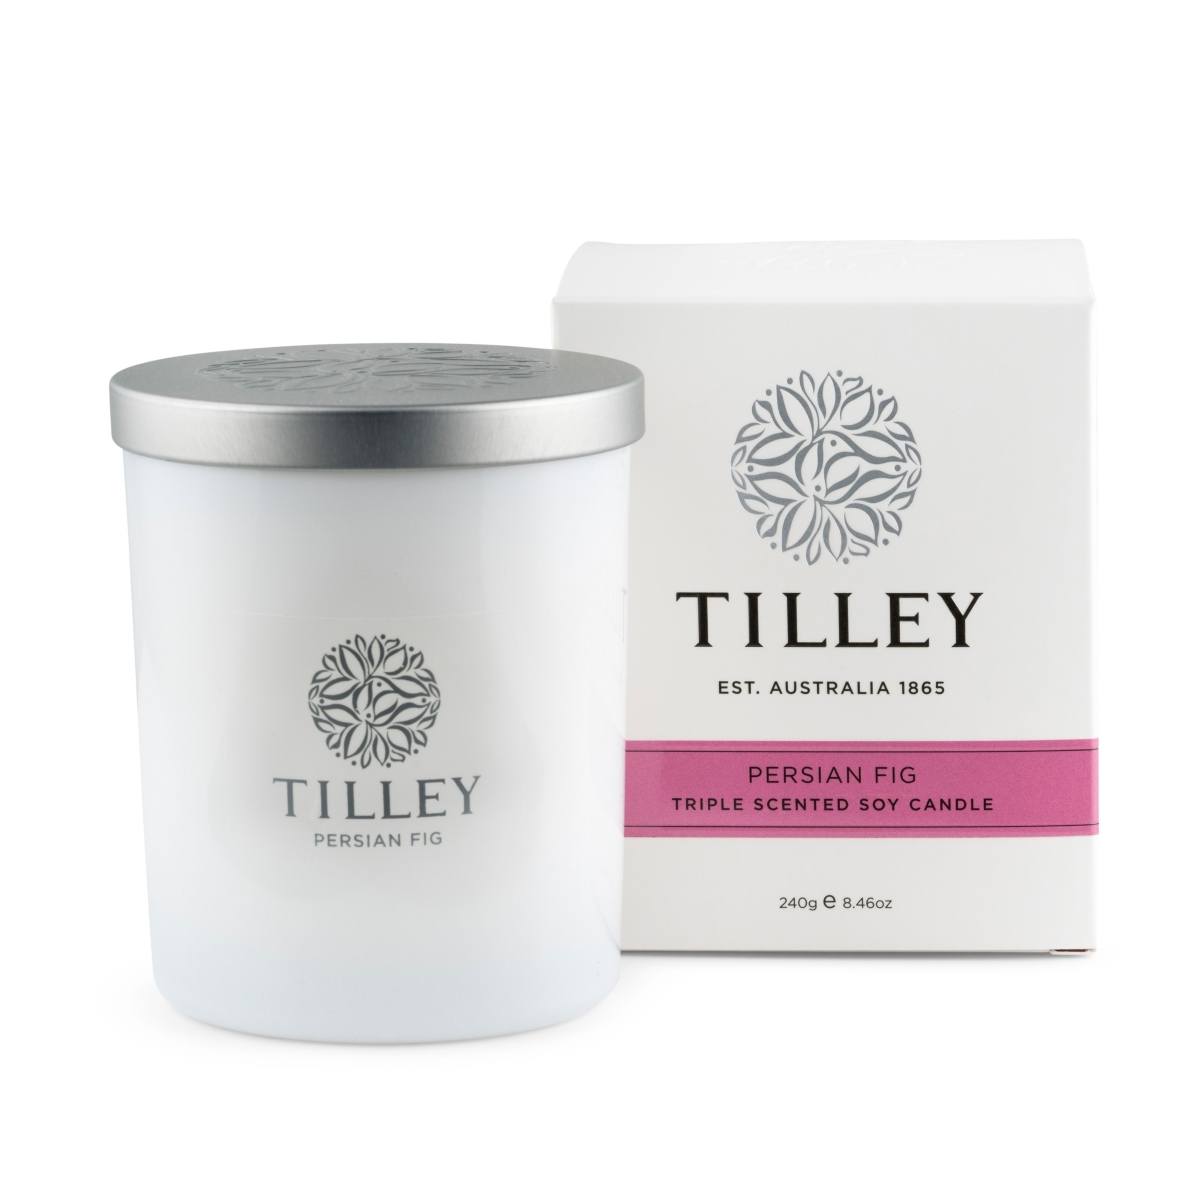 Tilley Persian Fig Soy Candle 240g / 45 Hour